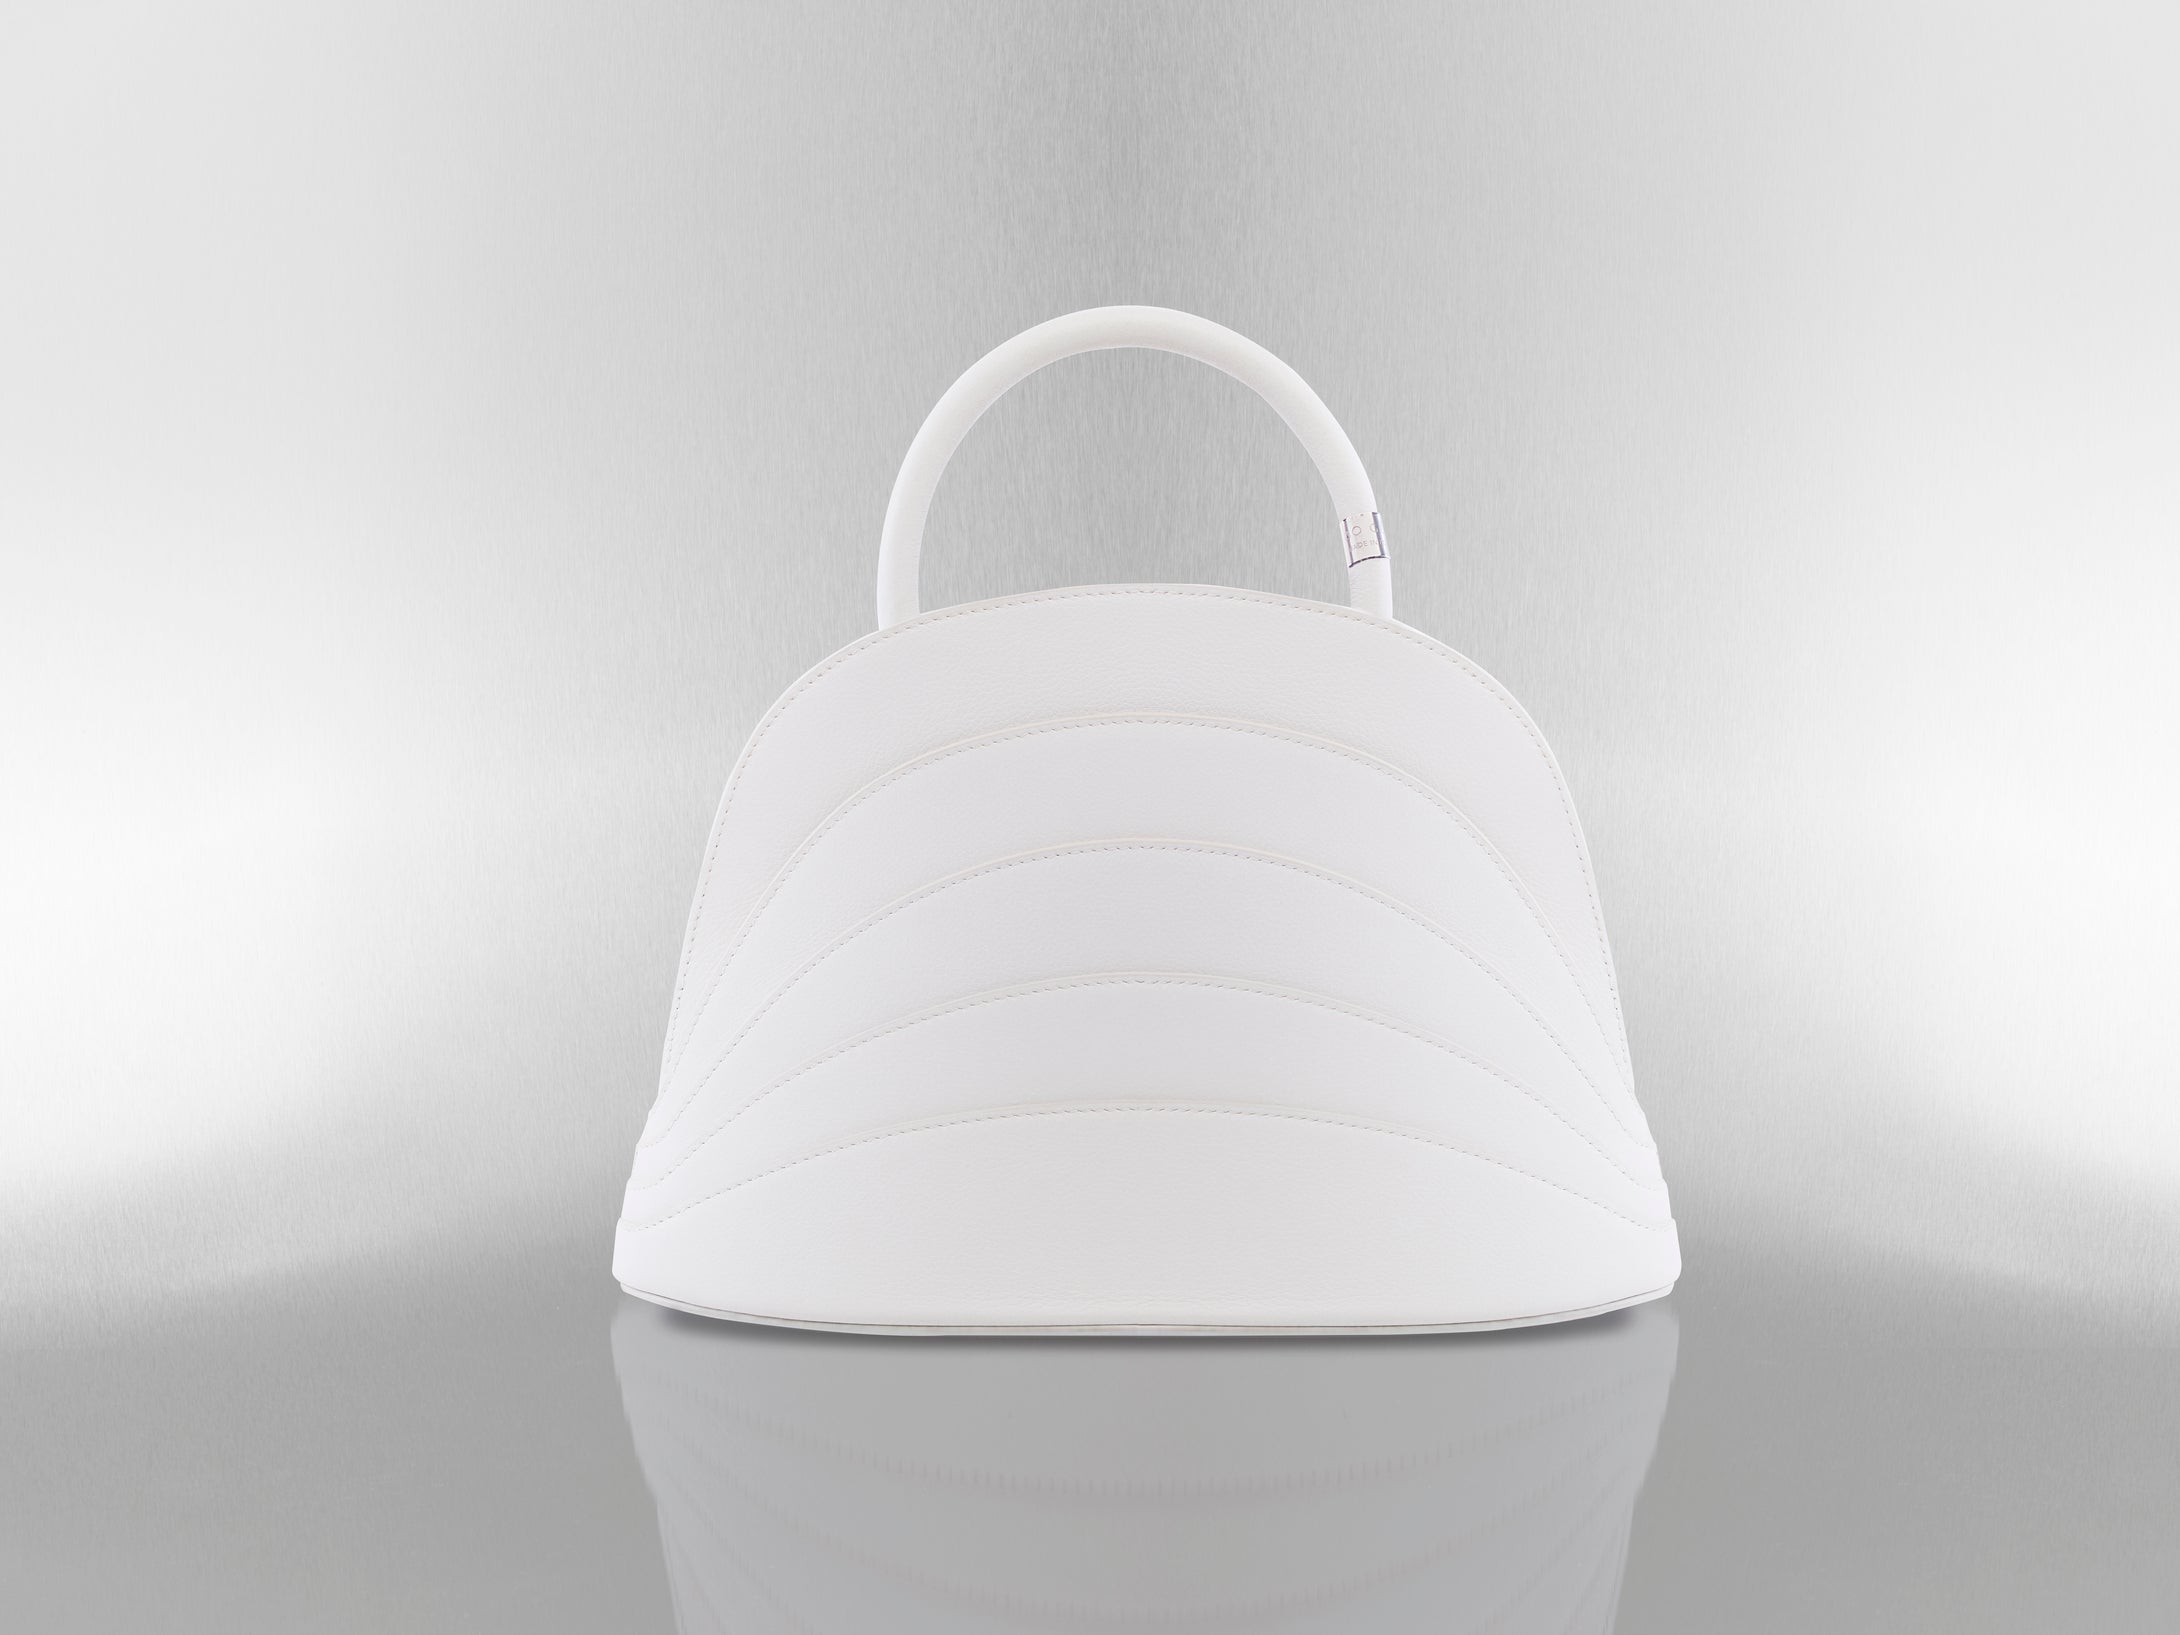 Gabo Guzzo Millefoglie J handbag in white calfskin and gold plated hardware. One-of-a-kind creation embellished with fine jewellery and handcrafted in Italy.